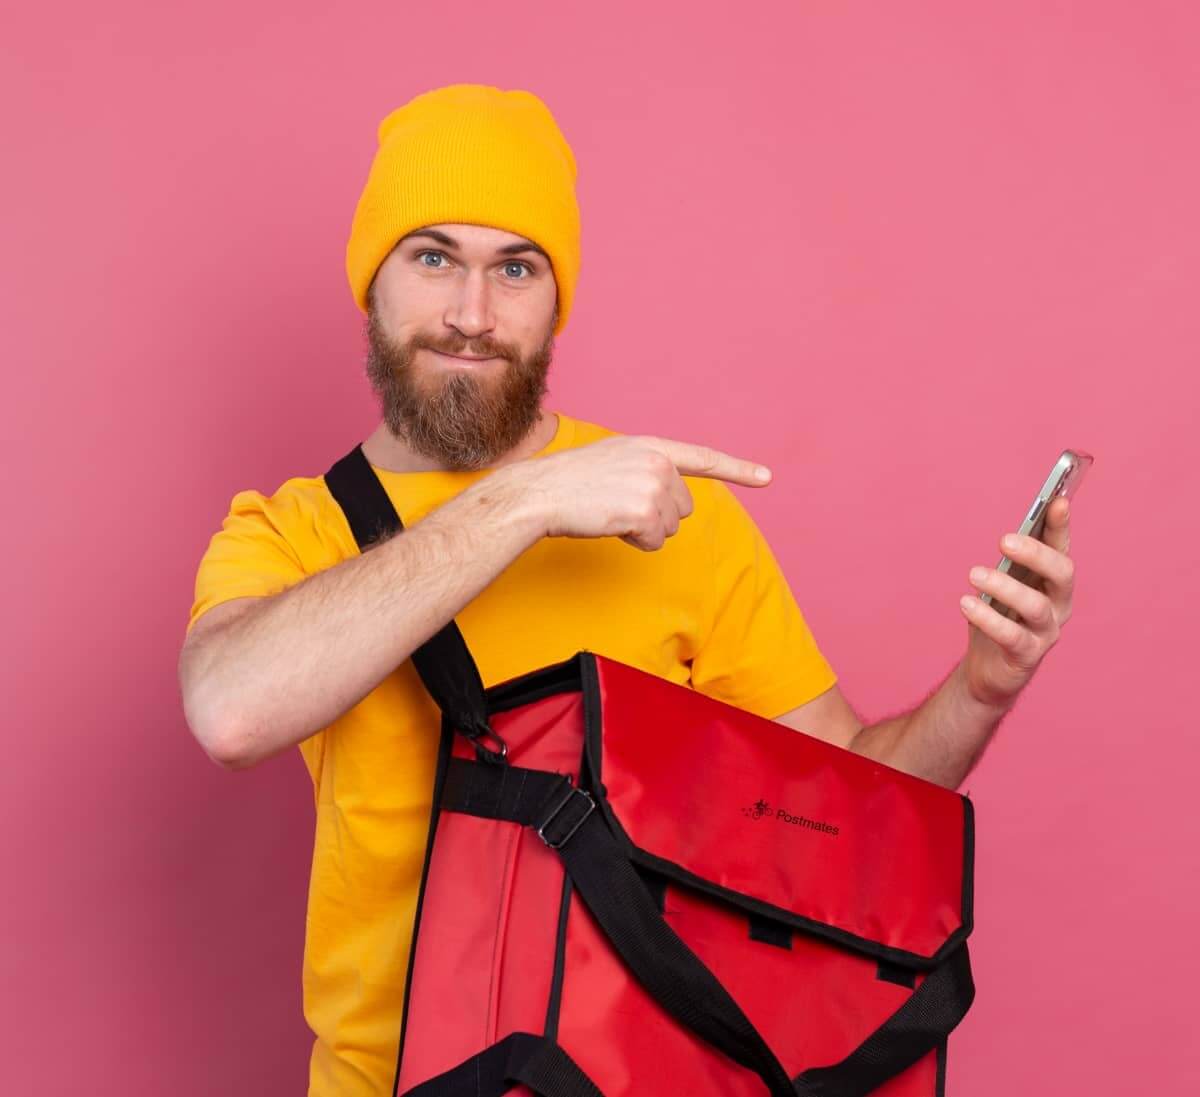 Develop a Food Delivery App Like Postmates